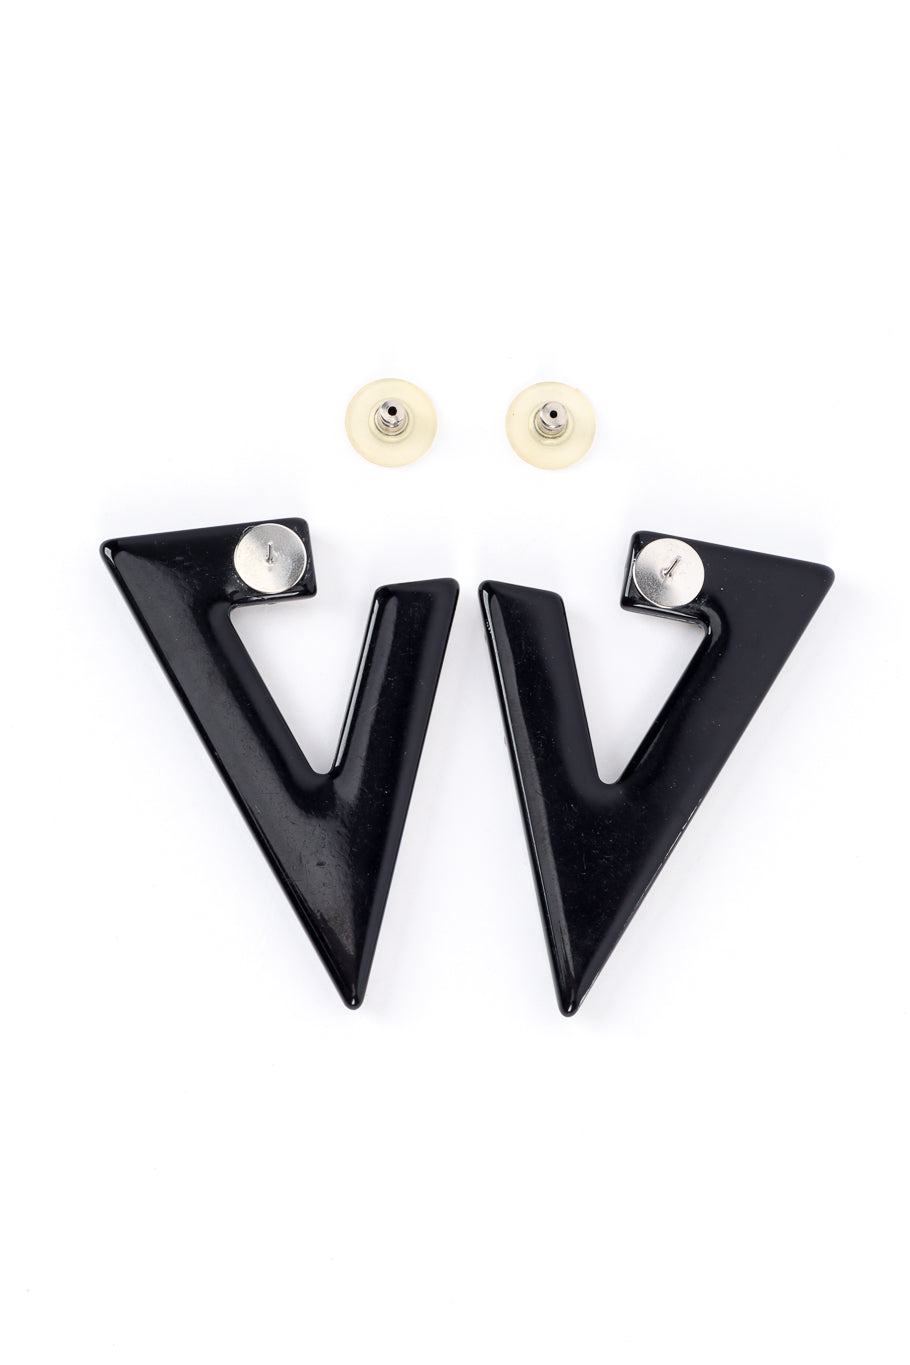 Vintage Crystal Rhinestone Split Triangle Earrings back view without post backing @recess la